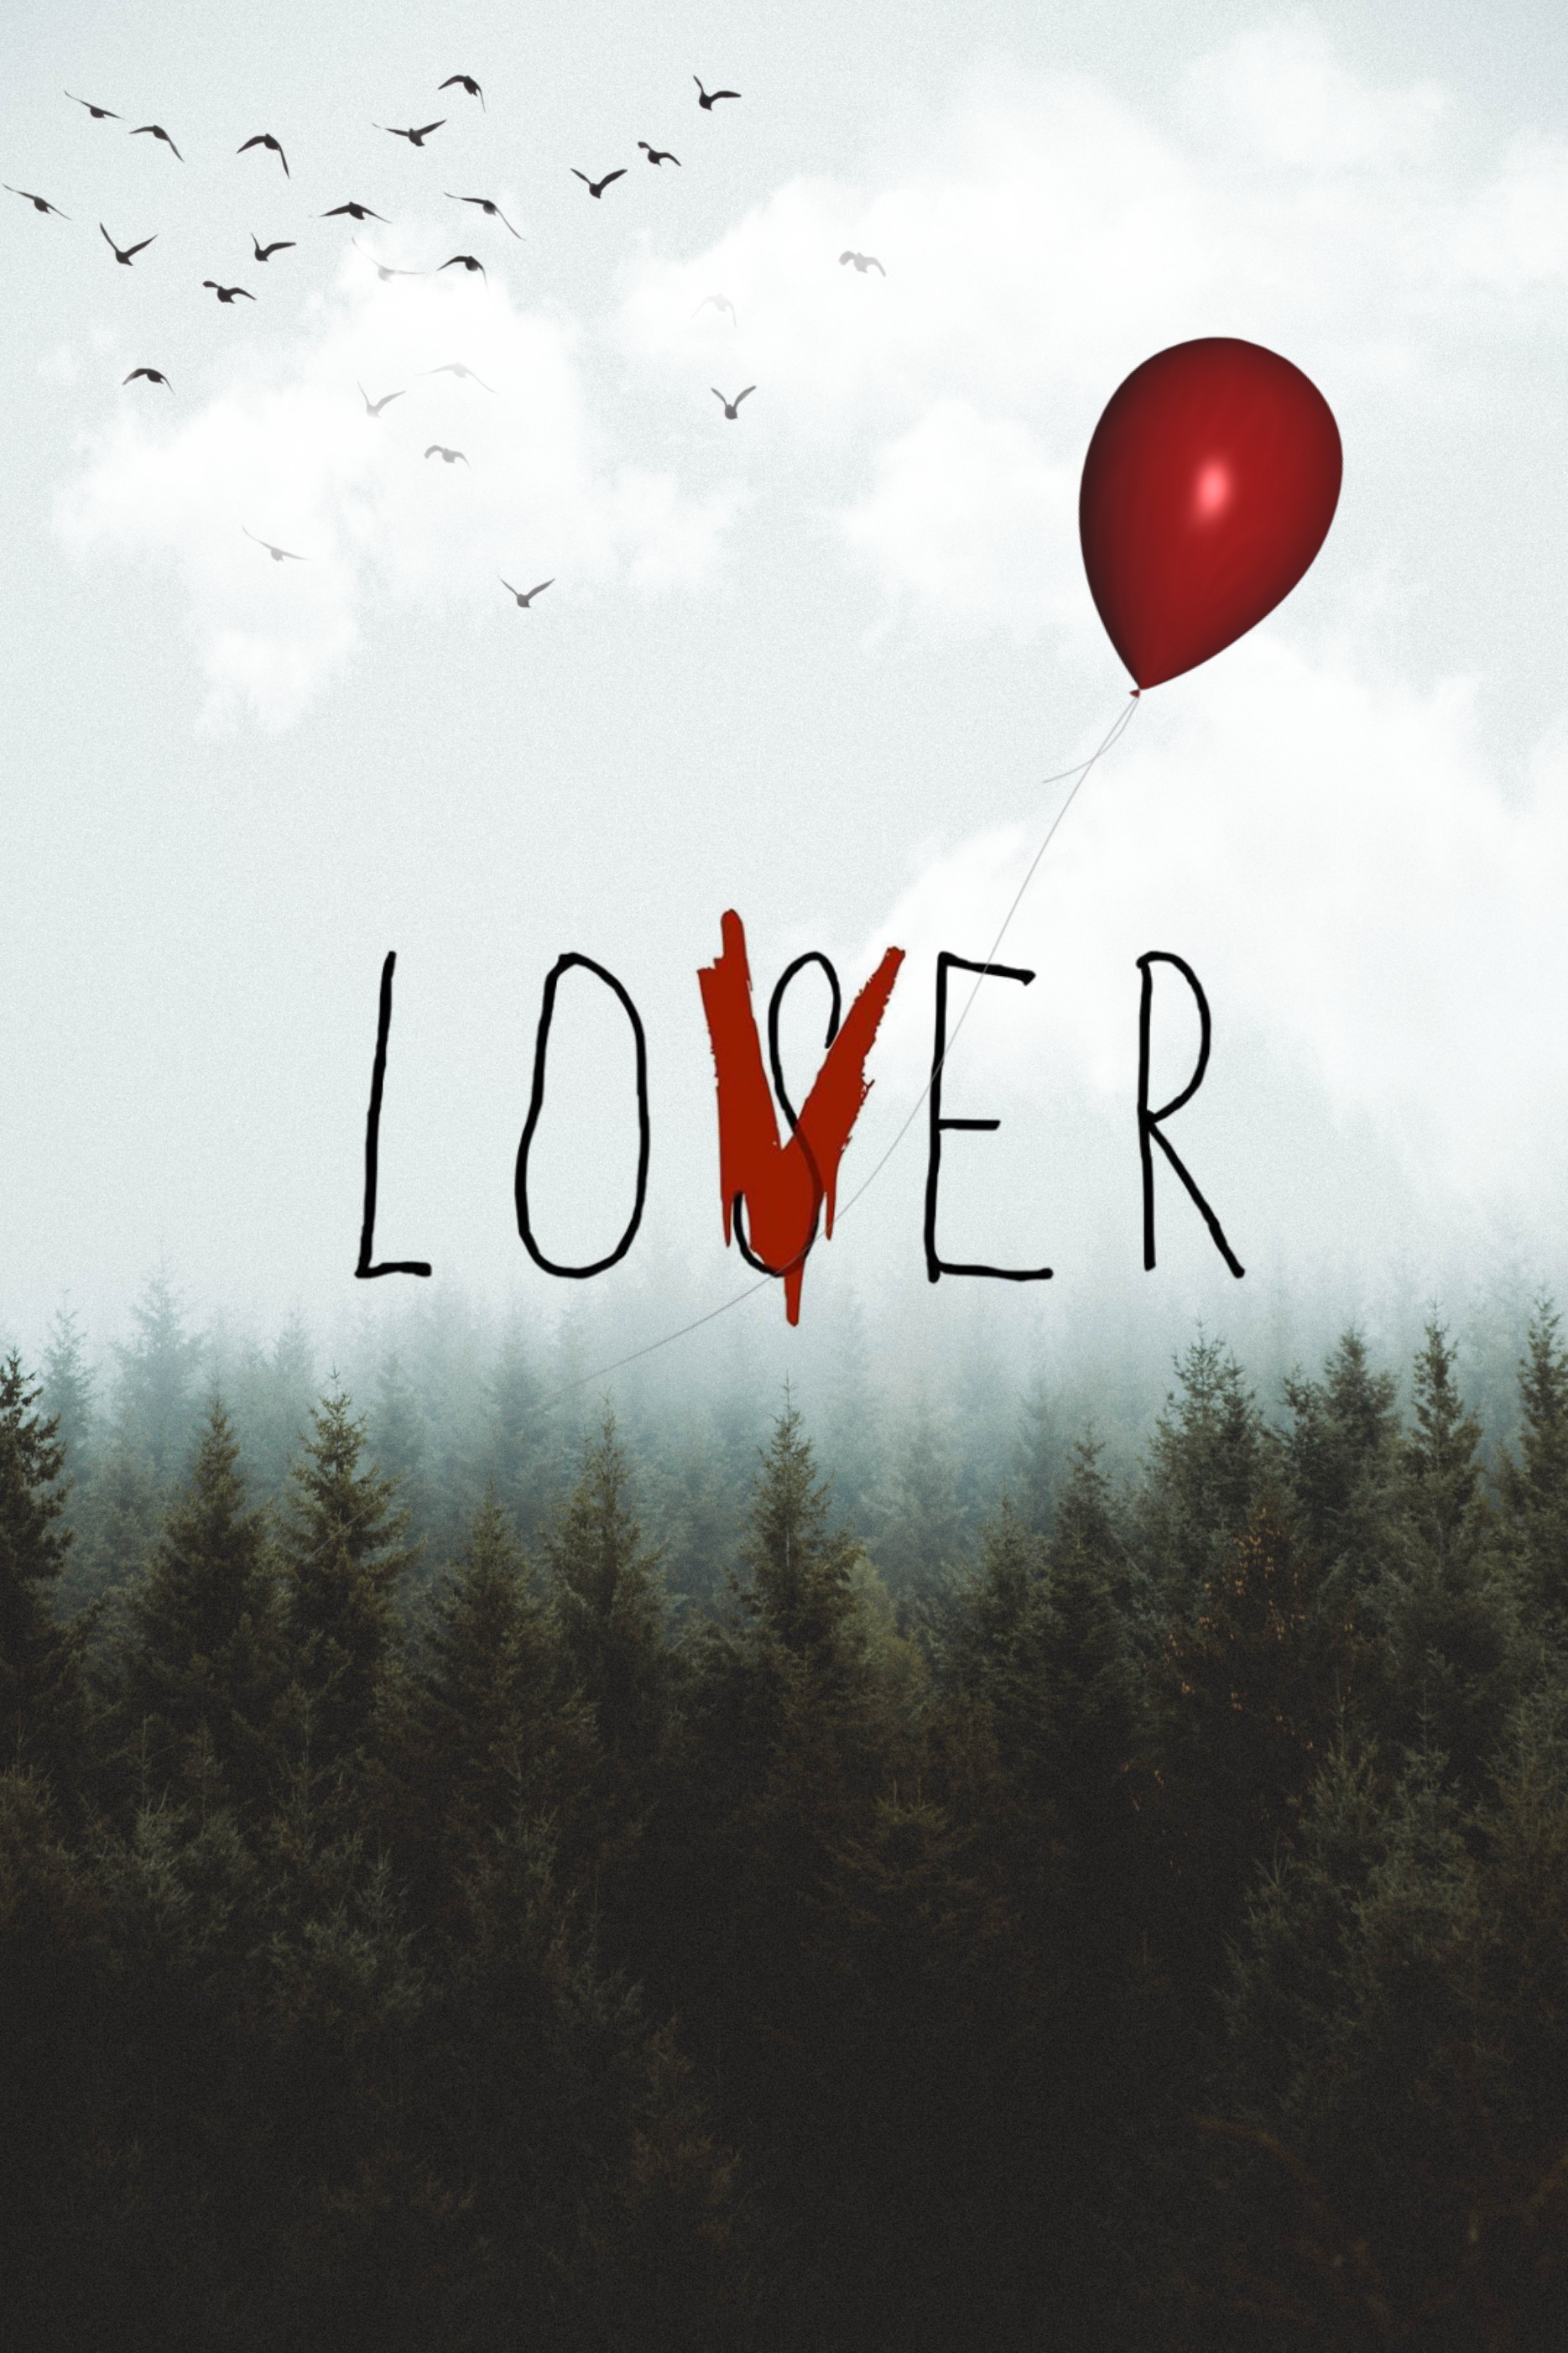 it baloon loser lover - Image by Cate